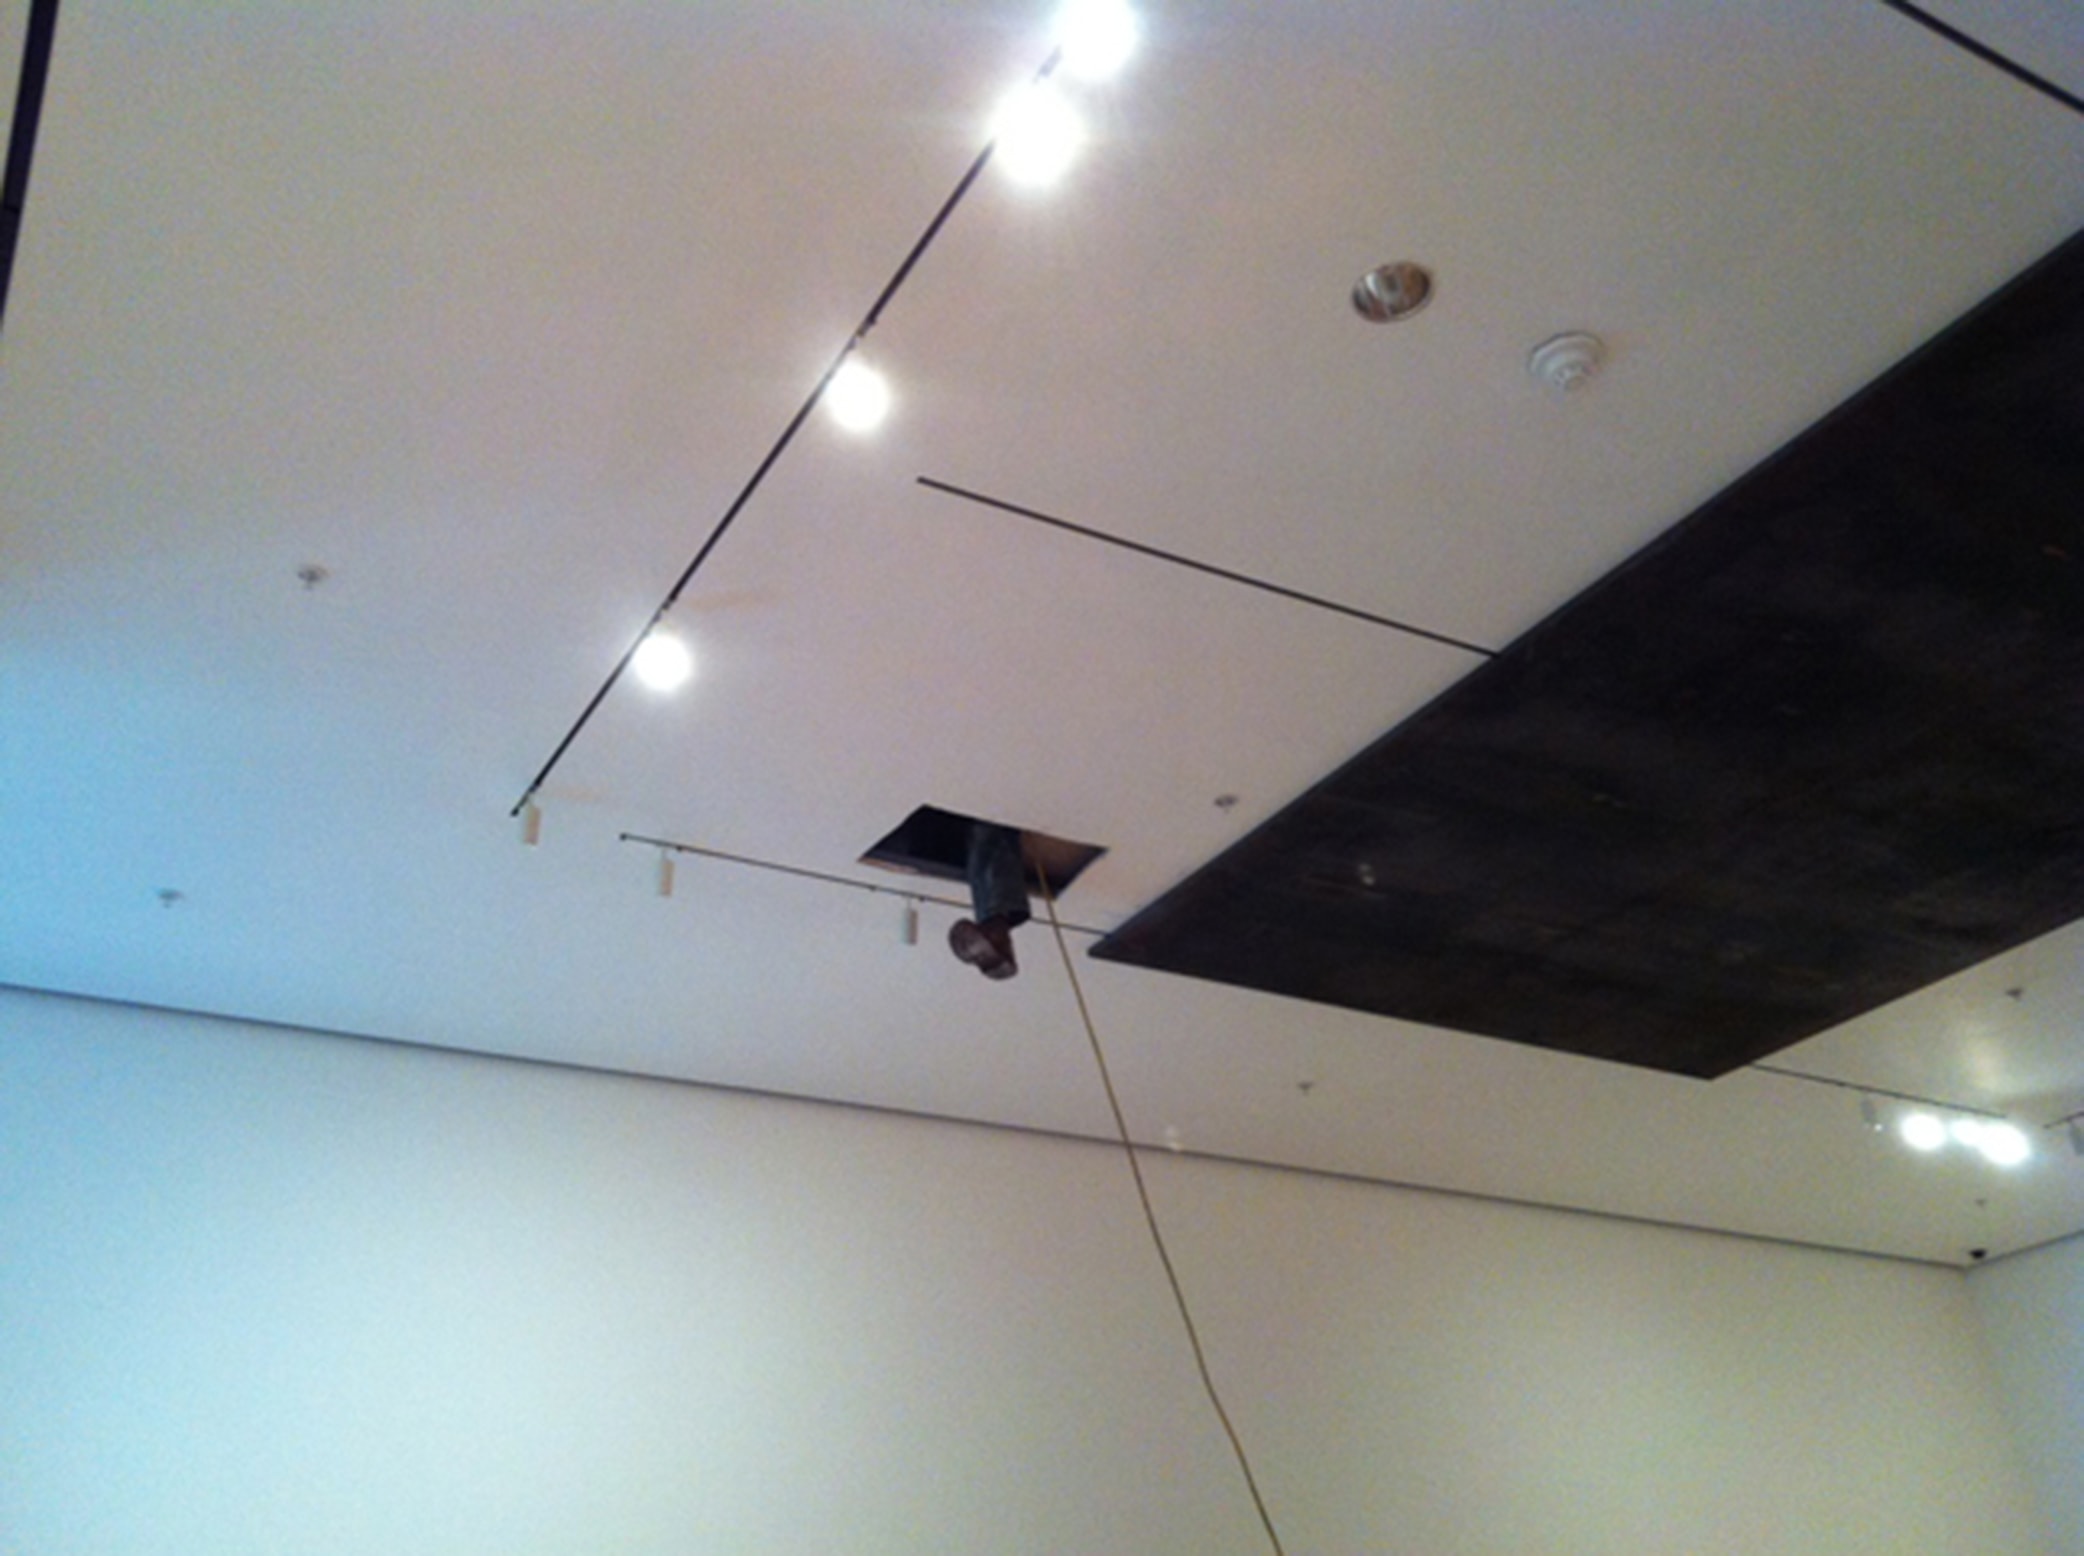 Richard Serra's Delineator Headed Up into the Ceiling Space